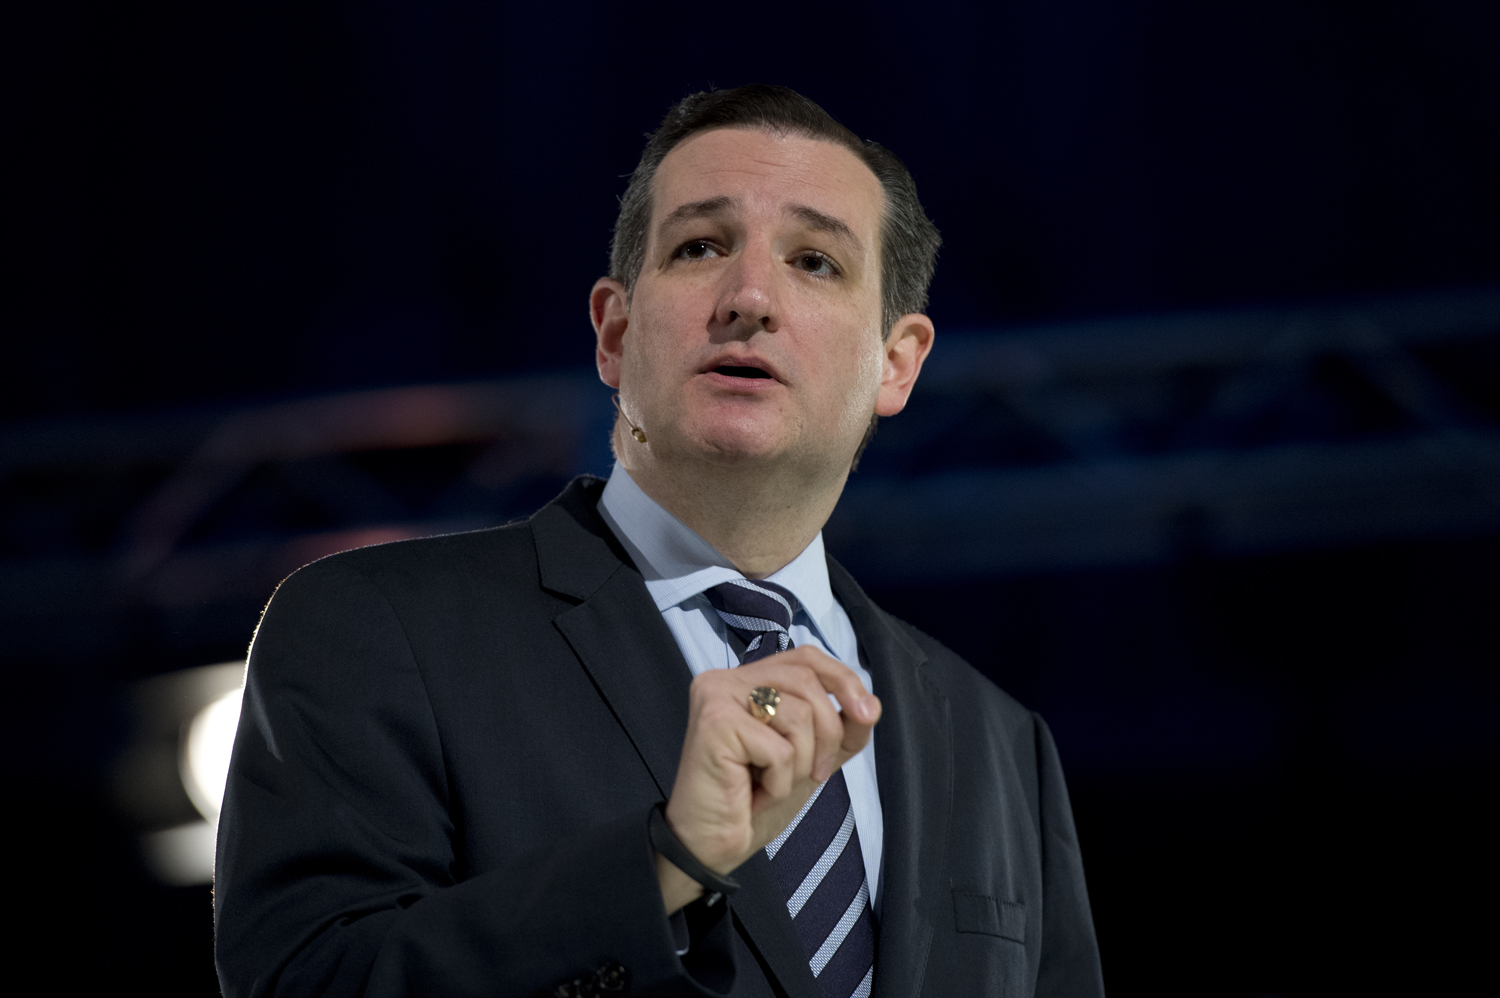 Sen. Ted Cruz speaks during a convocation at Liberty University's Vines Center in Lynchburg, Va., where he announced his candidacy for president on March 23, 2015. (Tom Williams — Roll Call/Getty Images)